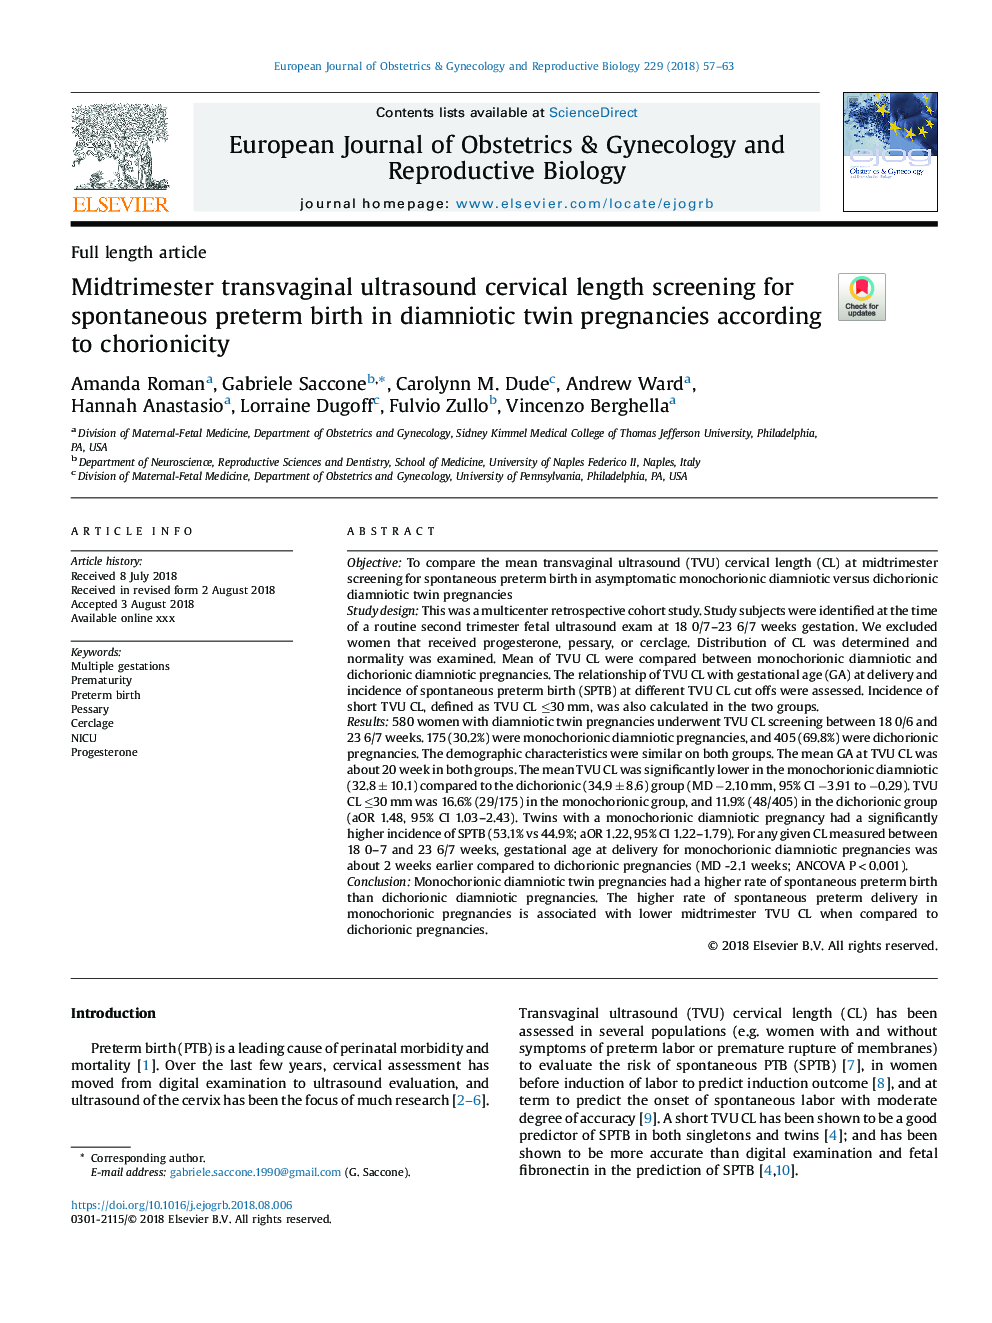 Midtrimester transvaginal ultrasound cervical length screening for spontaneous preterm birth in diamniotic twin pregnancies according to chorionicity